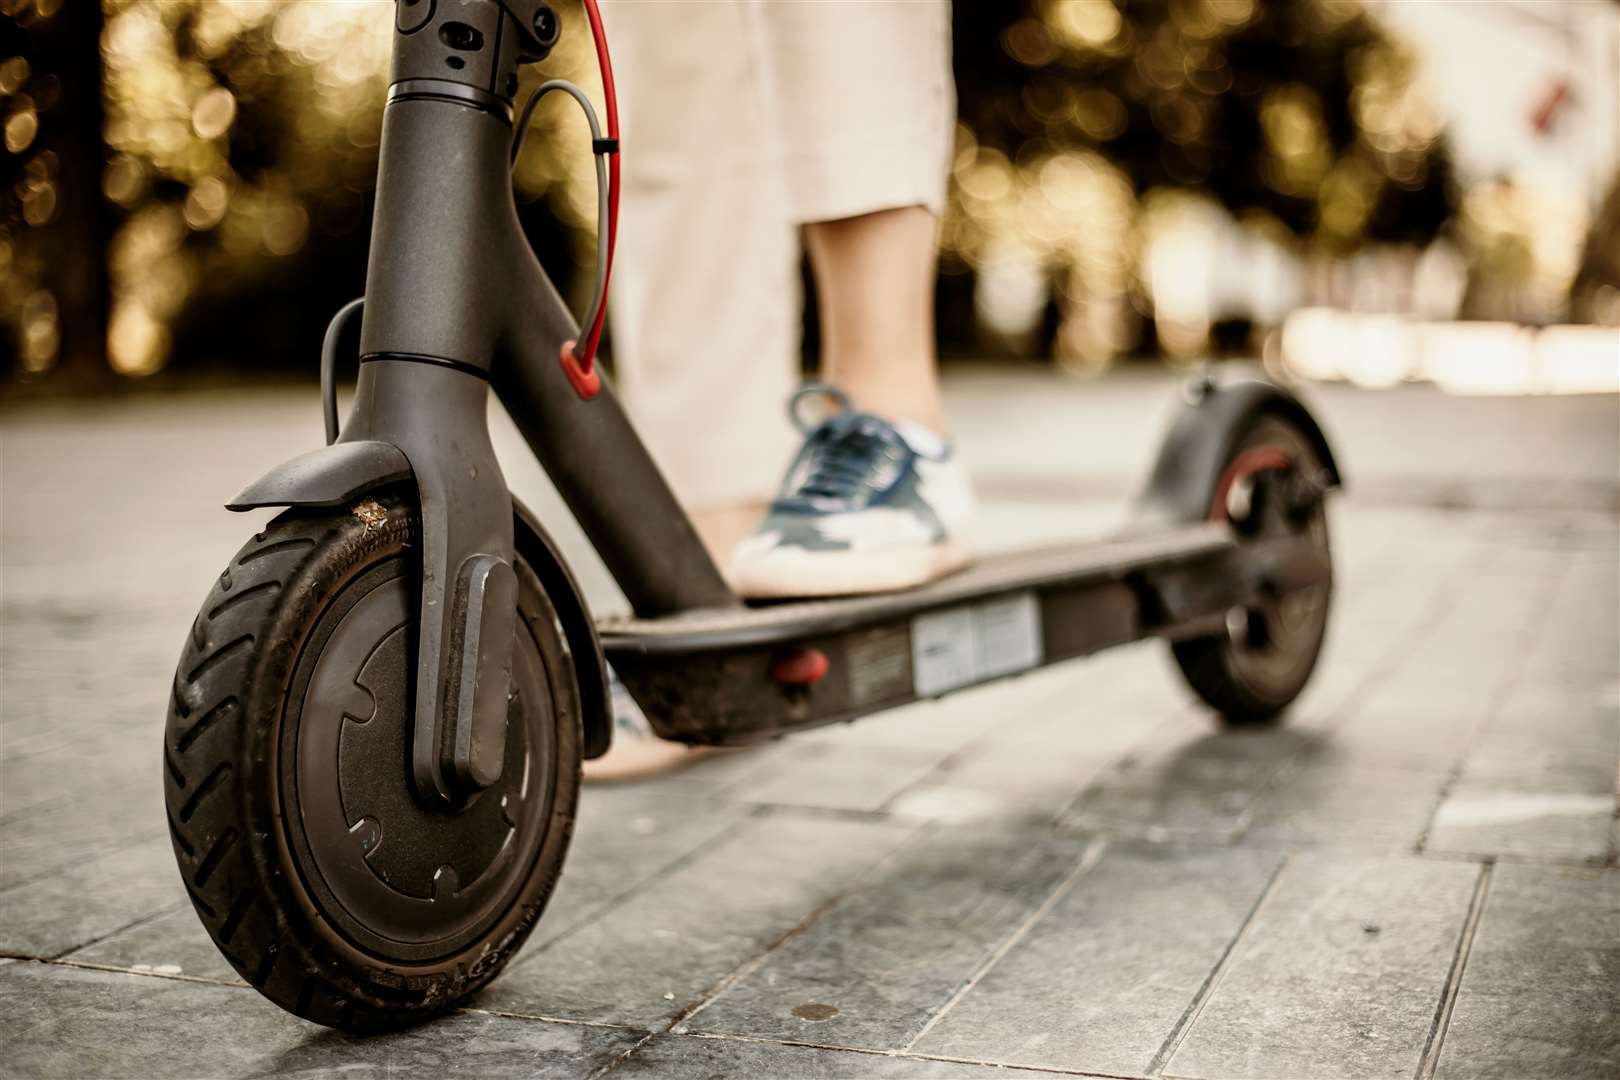 With the cost to run a car now so expensice, are e-scooters the answer? Image: Stock photo.